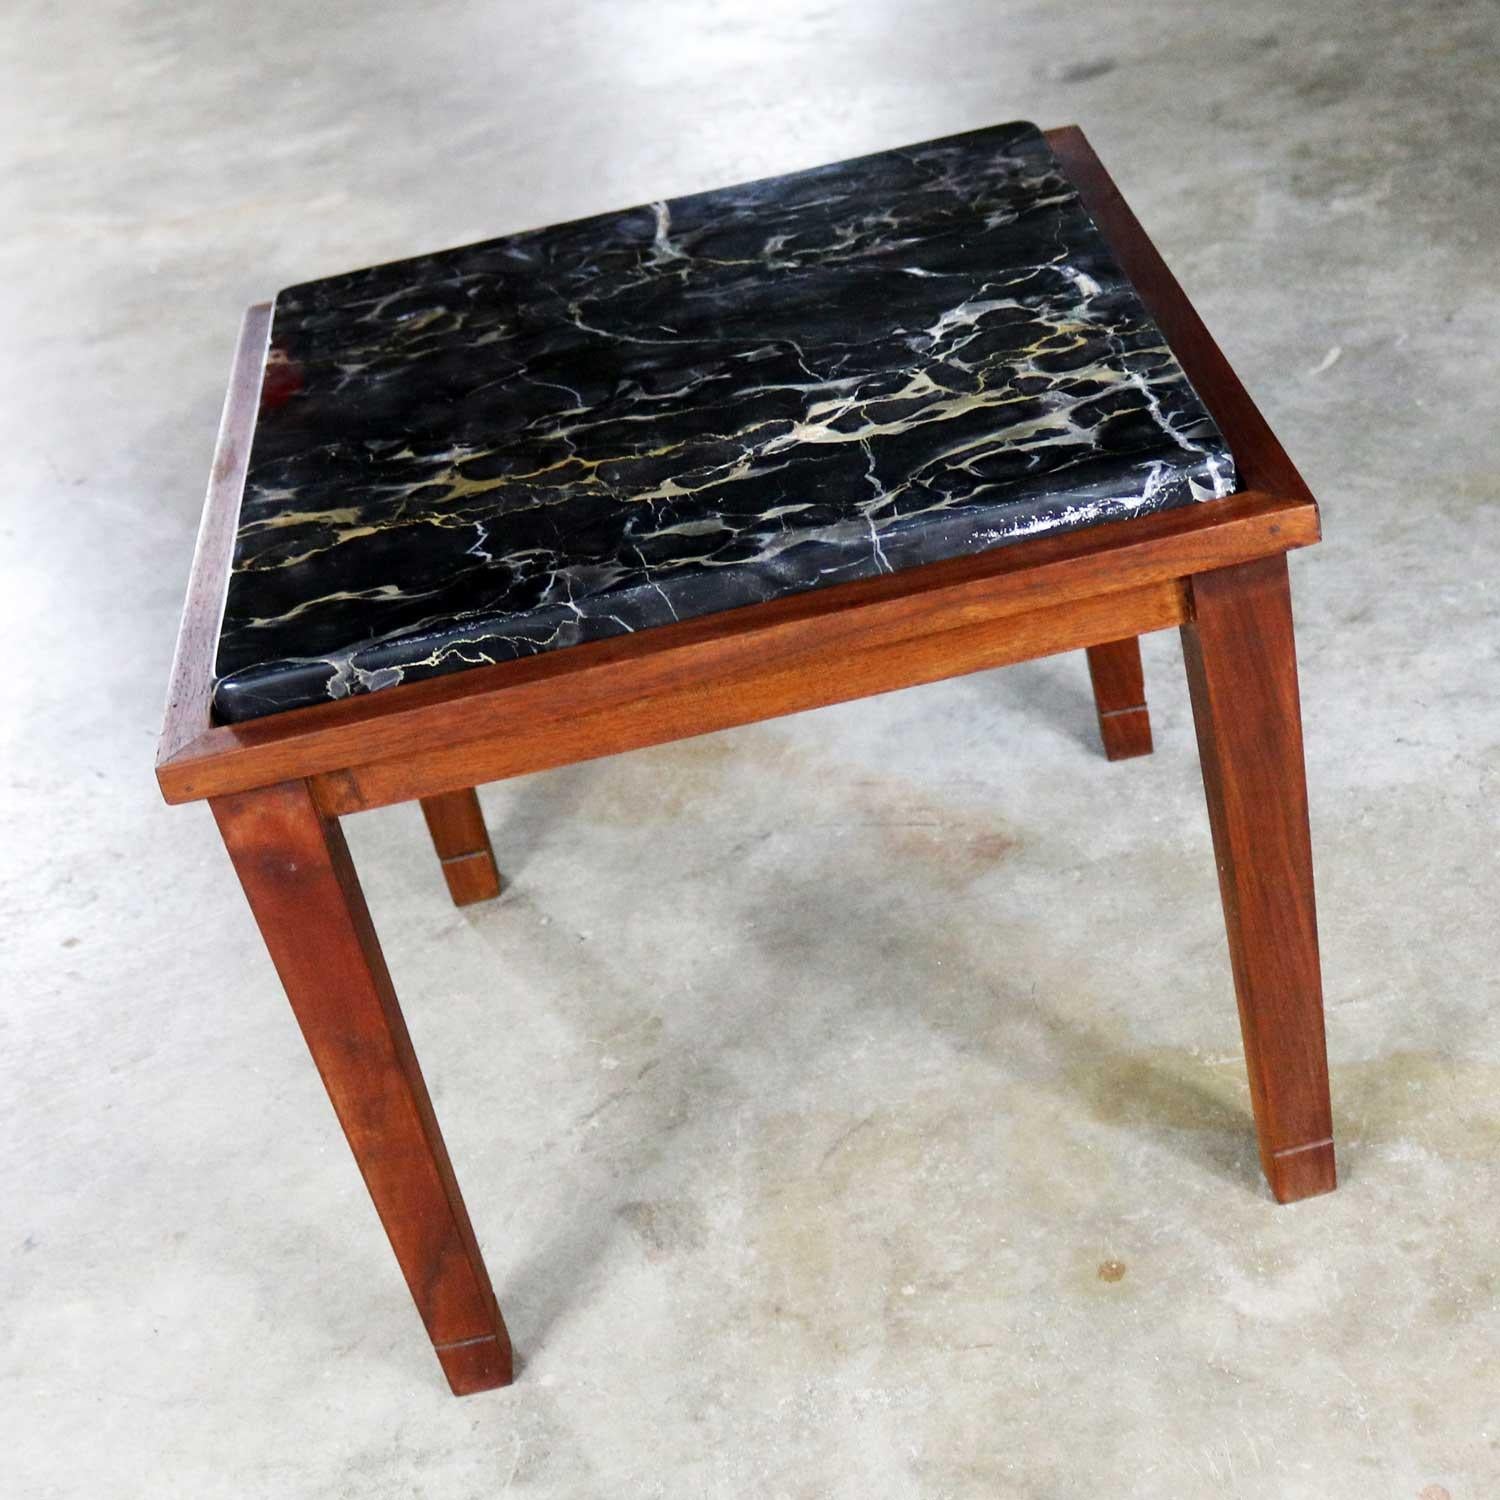 Lovely vintage square walnut frame mid-century modern end table or side table with gorgeous black marble insert top. Beautiful condition, keeping in mind that this is vintage and not new so will have signs of use and wear. This table is in fabulous